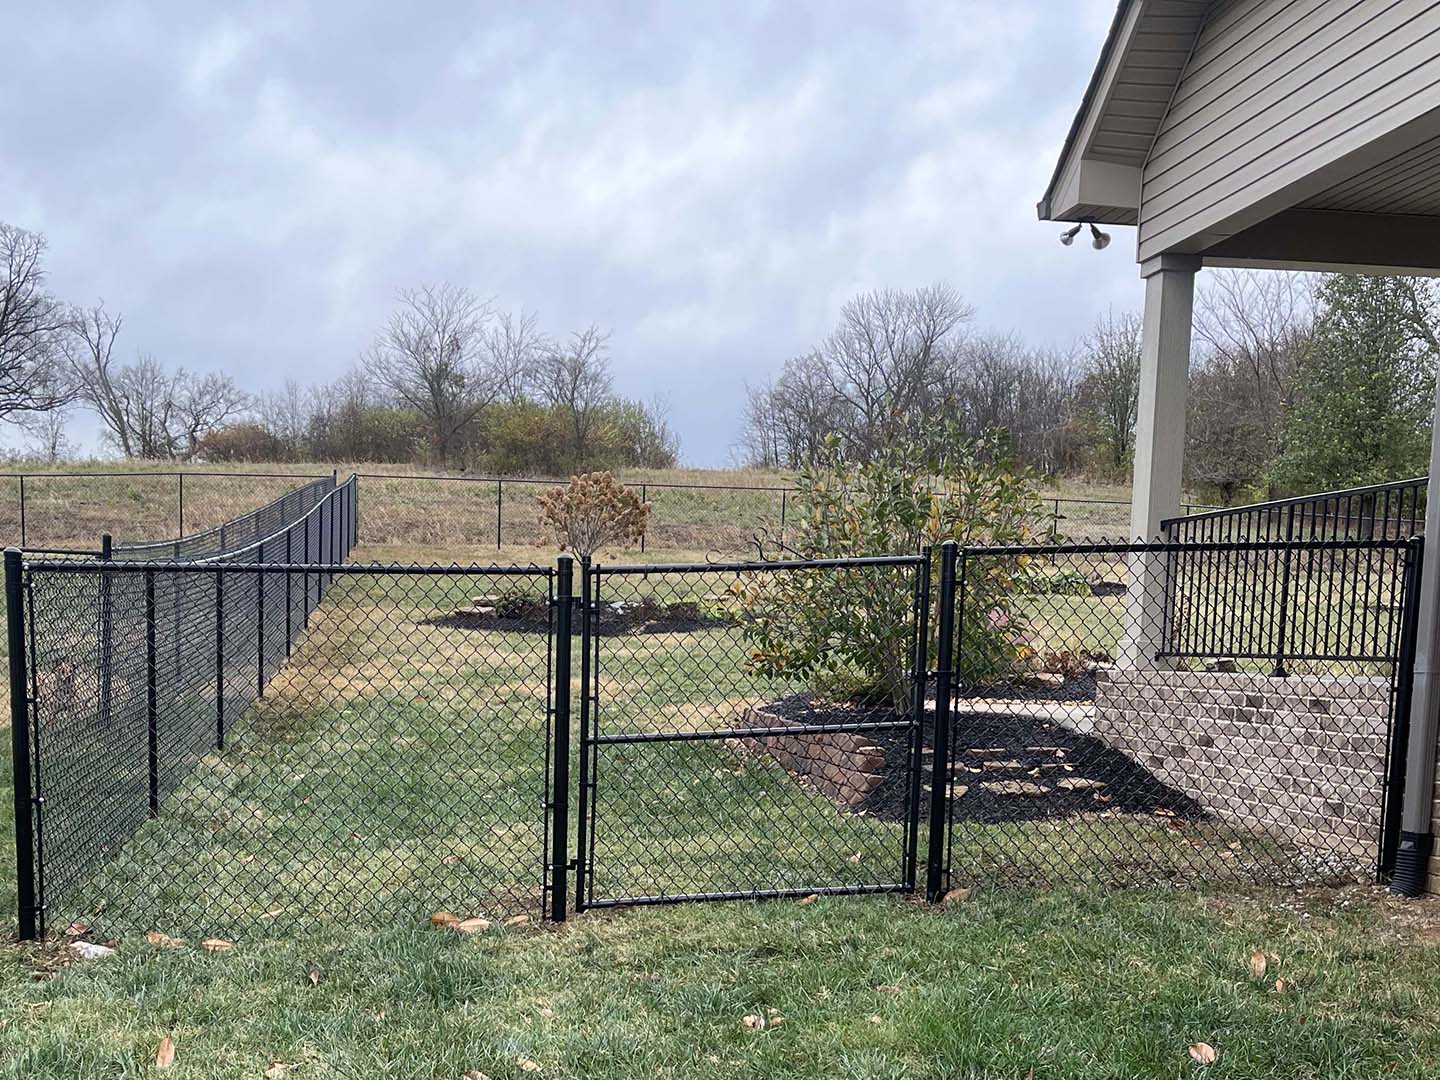 Photo of a Kentucky chain link fence